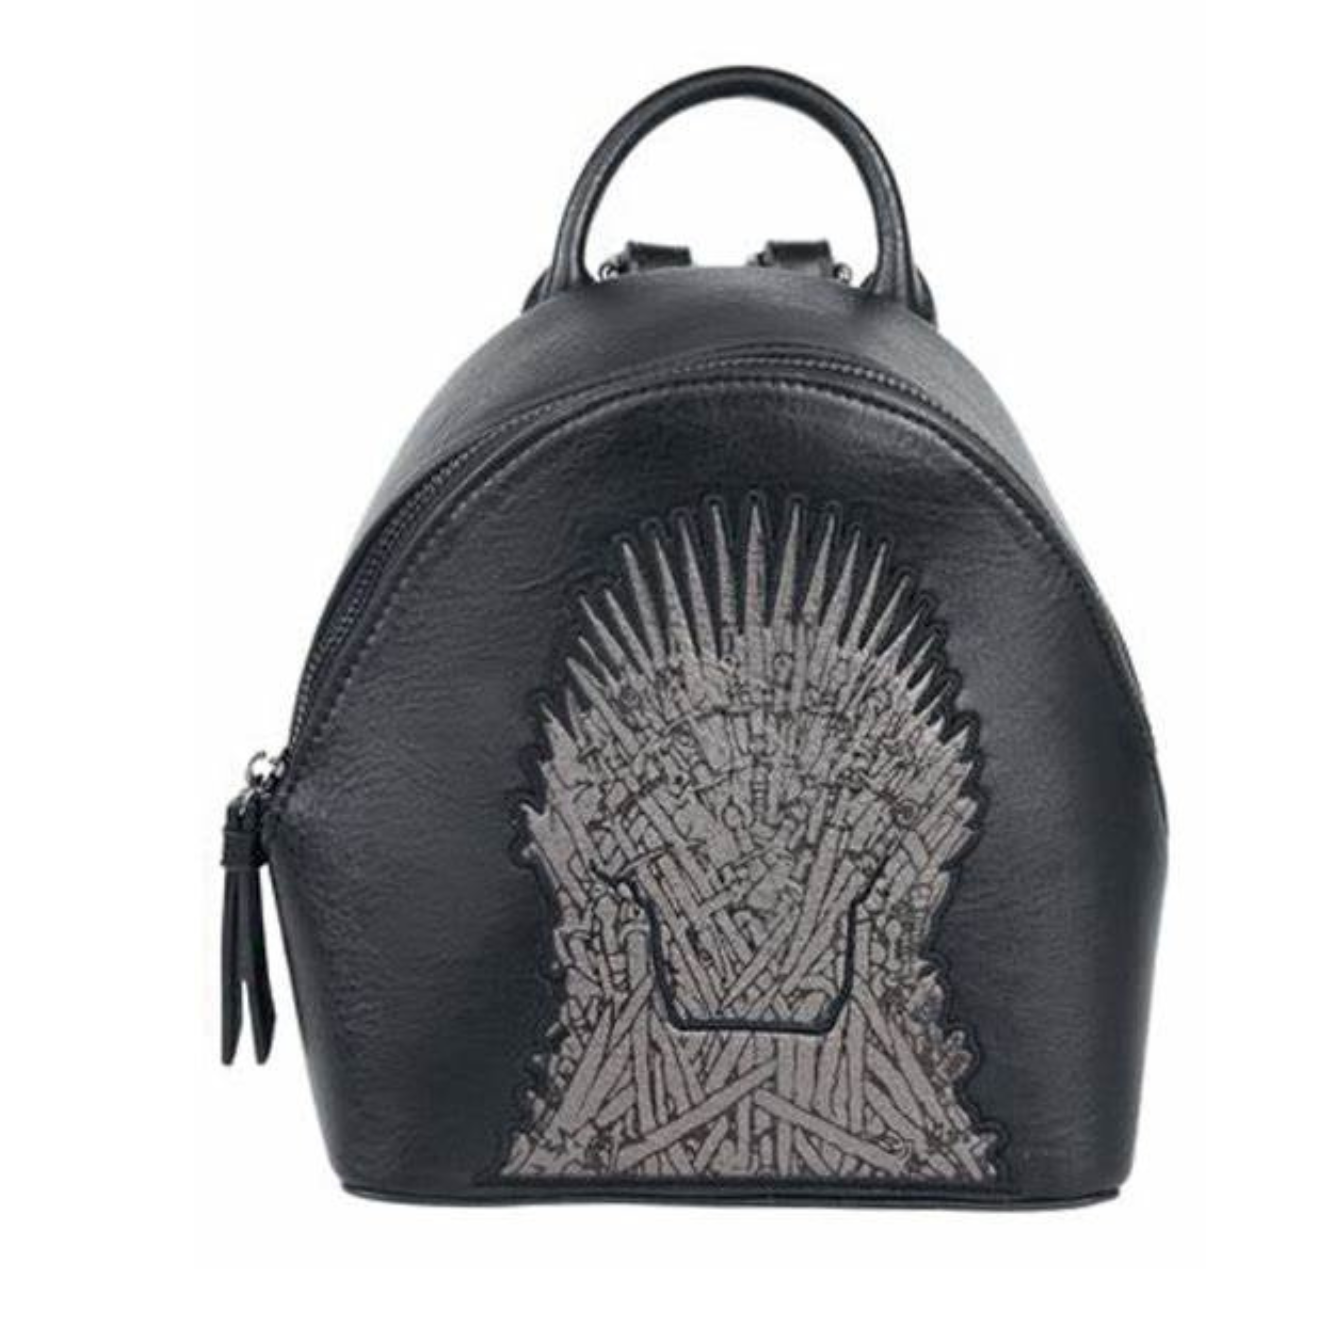 Game of Thrones Mini Backpack